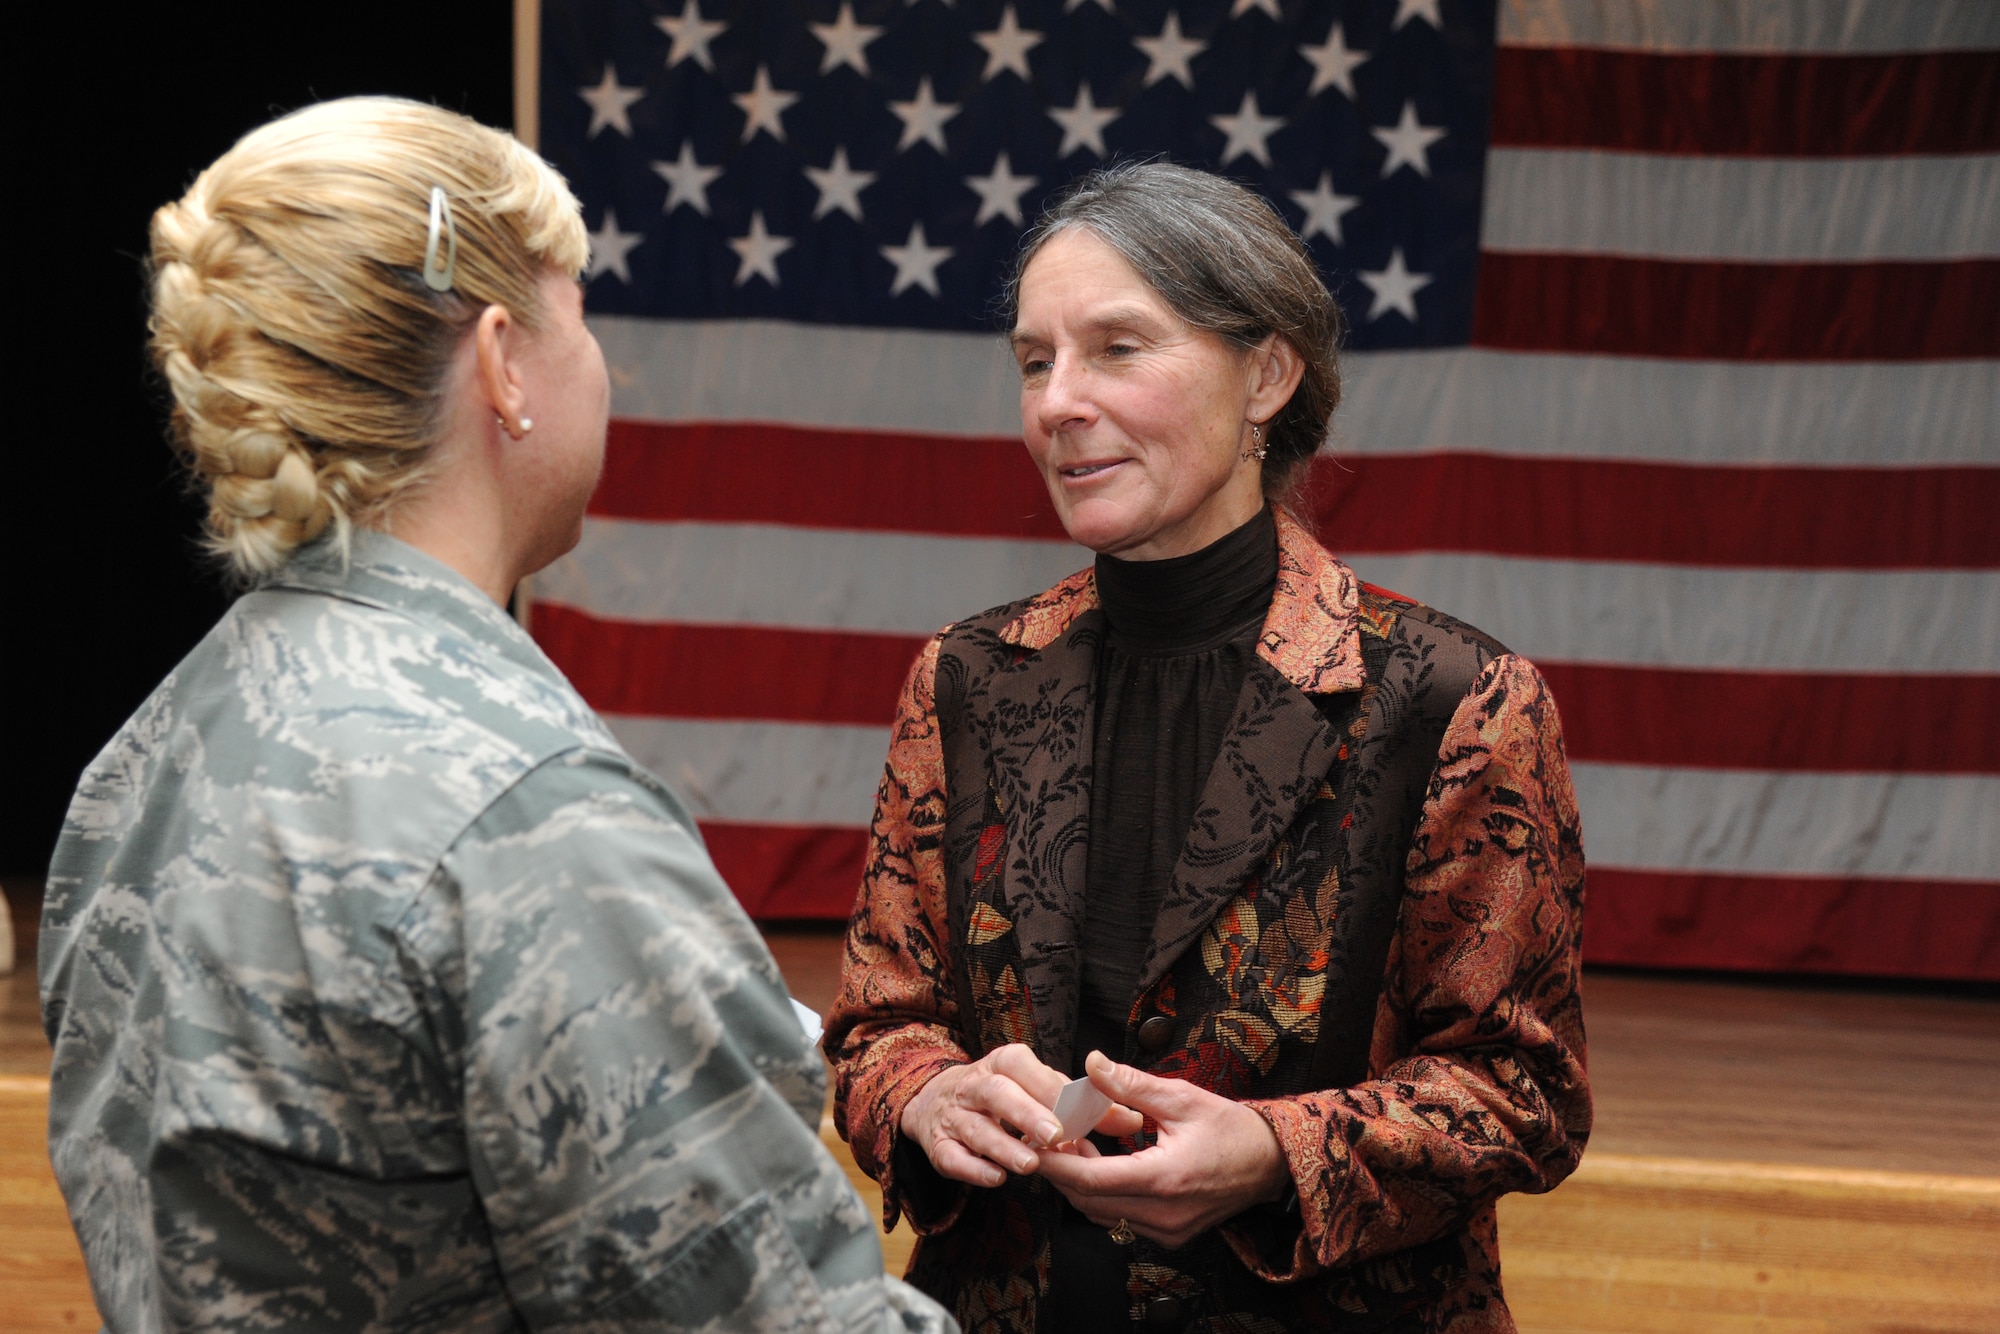 Lt. Col. Dorene Ross, 335th Training Squadron commander, speaks with Retired Army Brig. Gen. Rhonda Cornum, following a special program where Cornum shared her experience as a prisoner of war during the Persian Gulf conflict with Keesler personnel Dec. 5, 2013, at the Keesler Medical Center.  During the Persian Gulf War, Cornum’s helicopter was shot down while on a search and rescue mission. She suffered two broken arms, a gunshot wound in the back and was captured by enemy forces. Cornum is the wife of Brig. Gen. Kory Cornum, 81st Medical Group commander. (U.S. Air Force photo by Kemberly Groue)